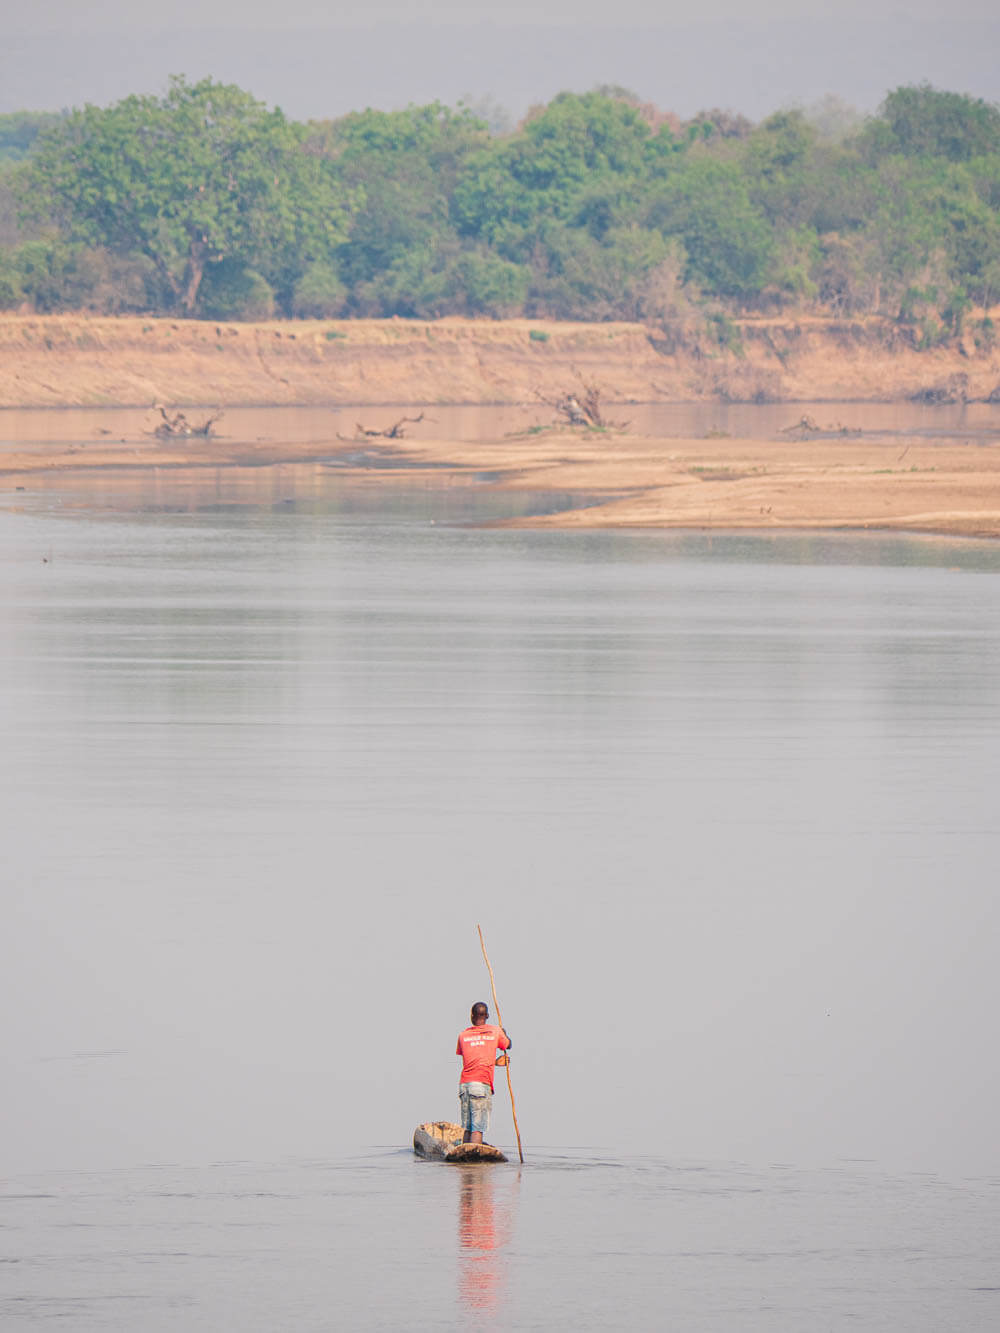 Local fisherman punts his dugout canoe on the Luangwa river